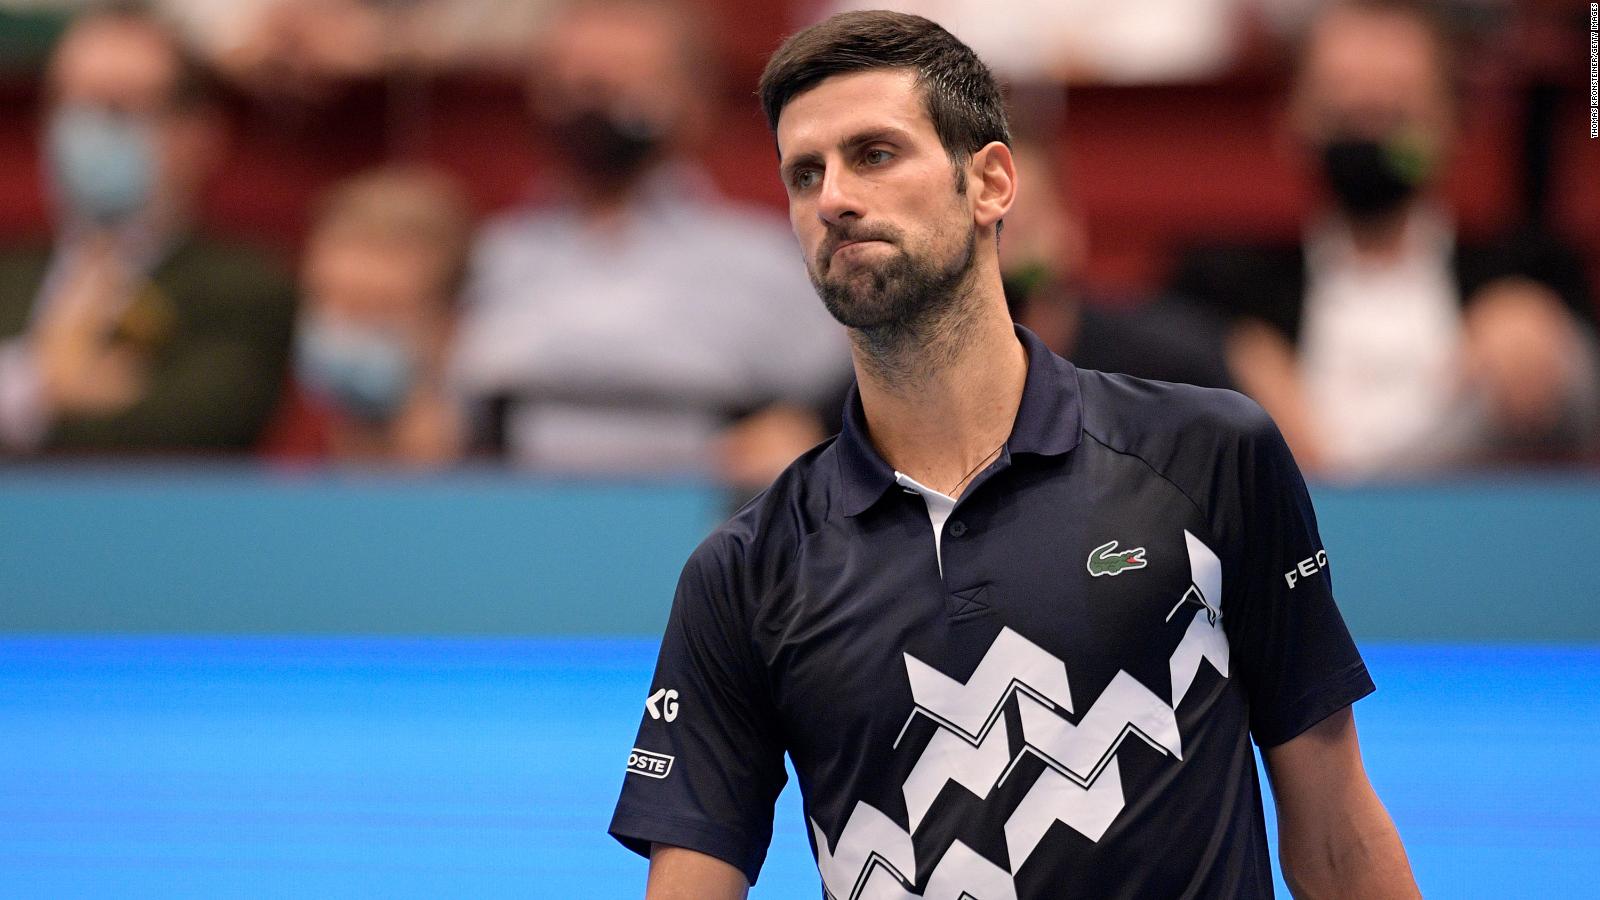 Novak Djokovic case in Australia: how did we get to this point?